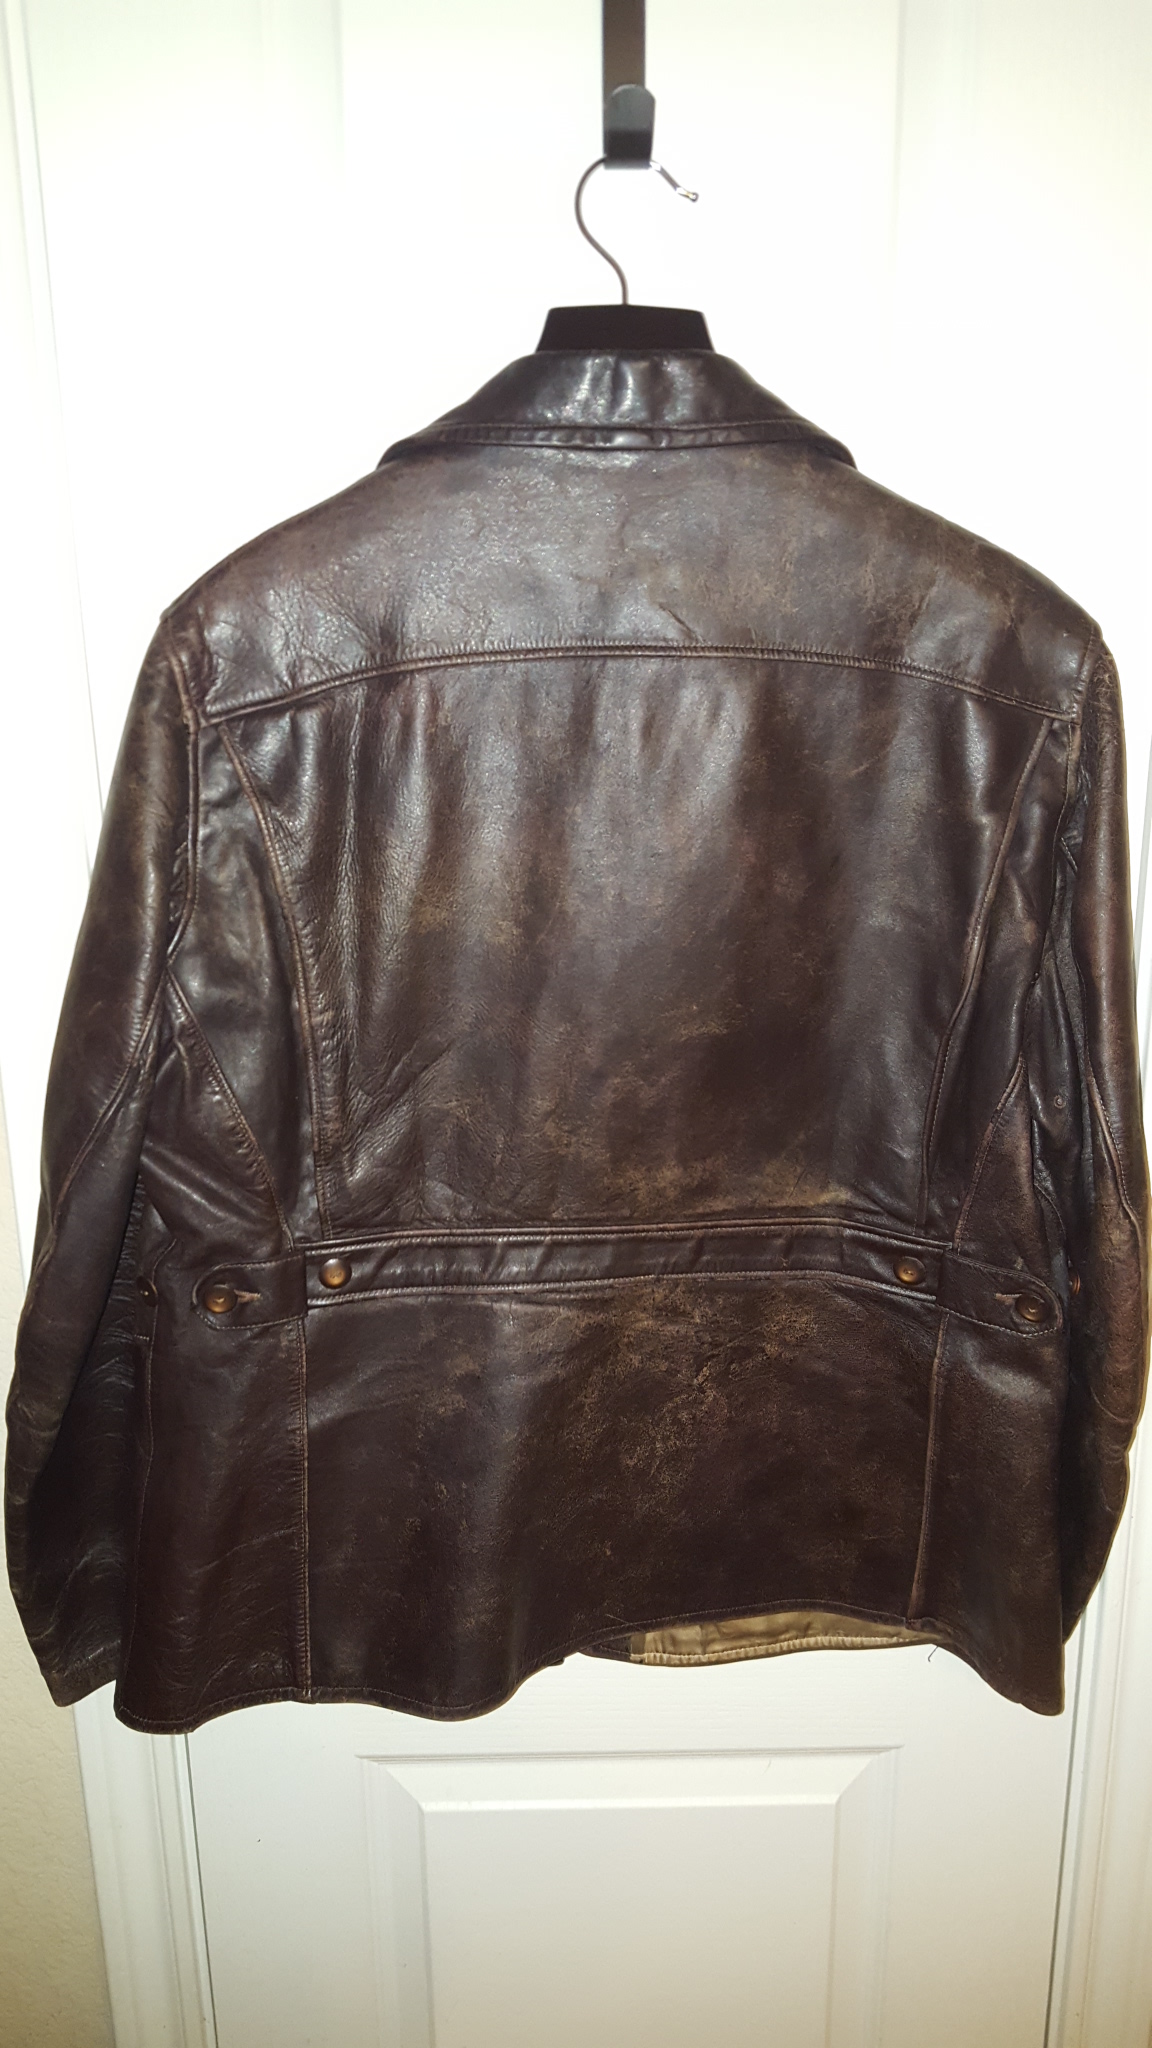 Need advice on reducing puckering on vintage leather jacket | The ...